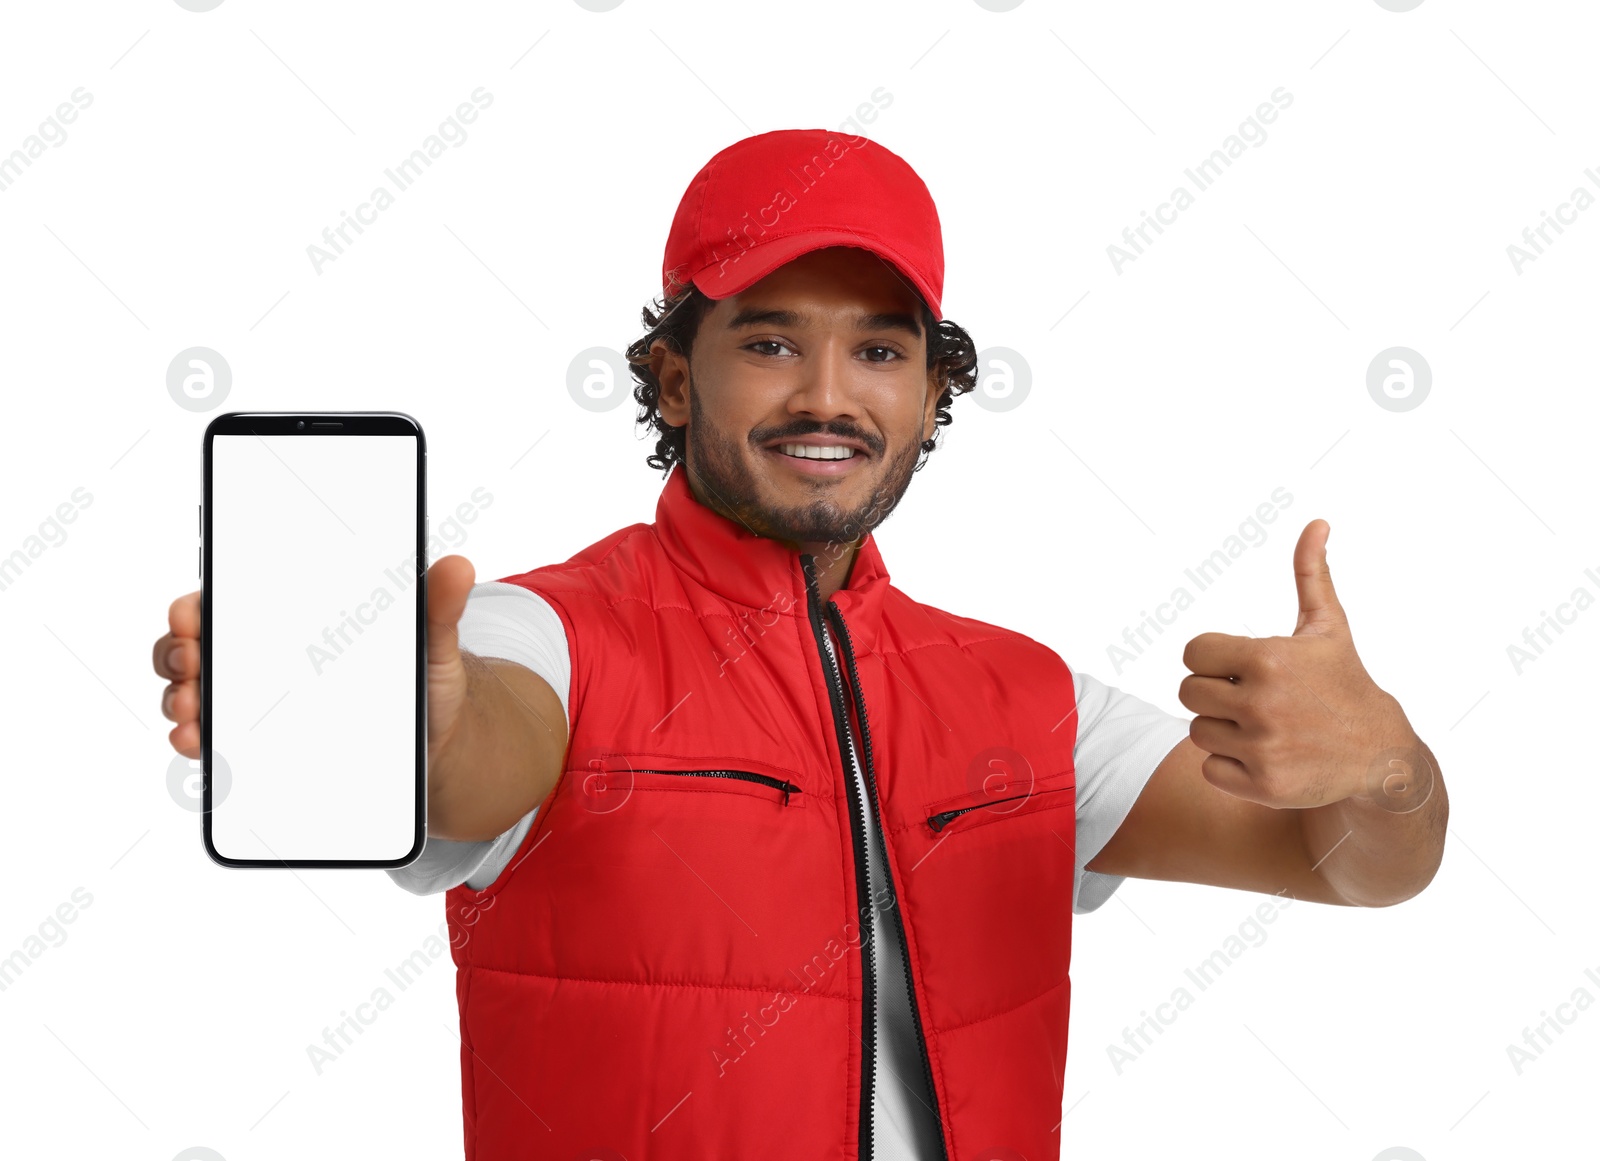 Image of Happy courier holding smartphone with empty screen and showing thumbs up on white background